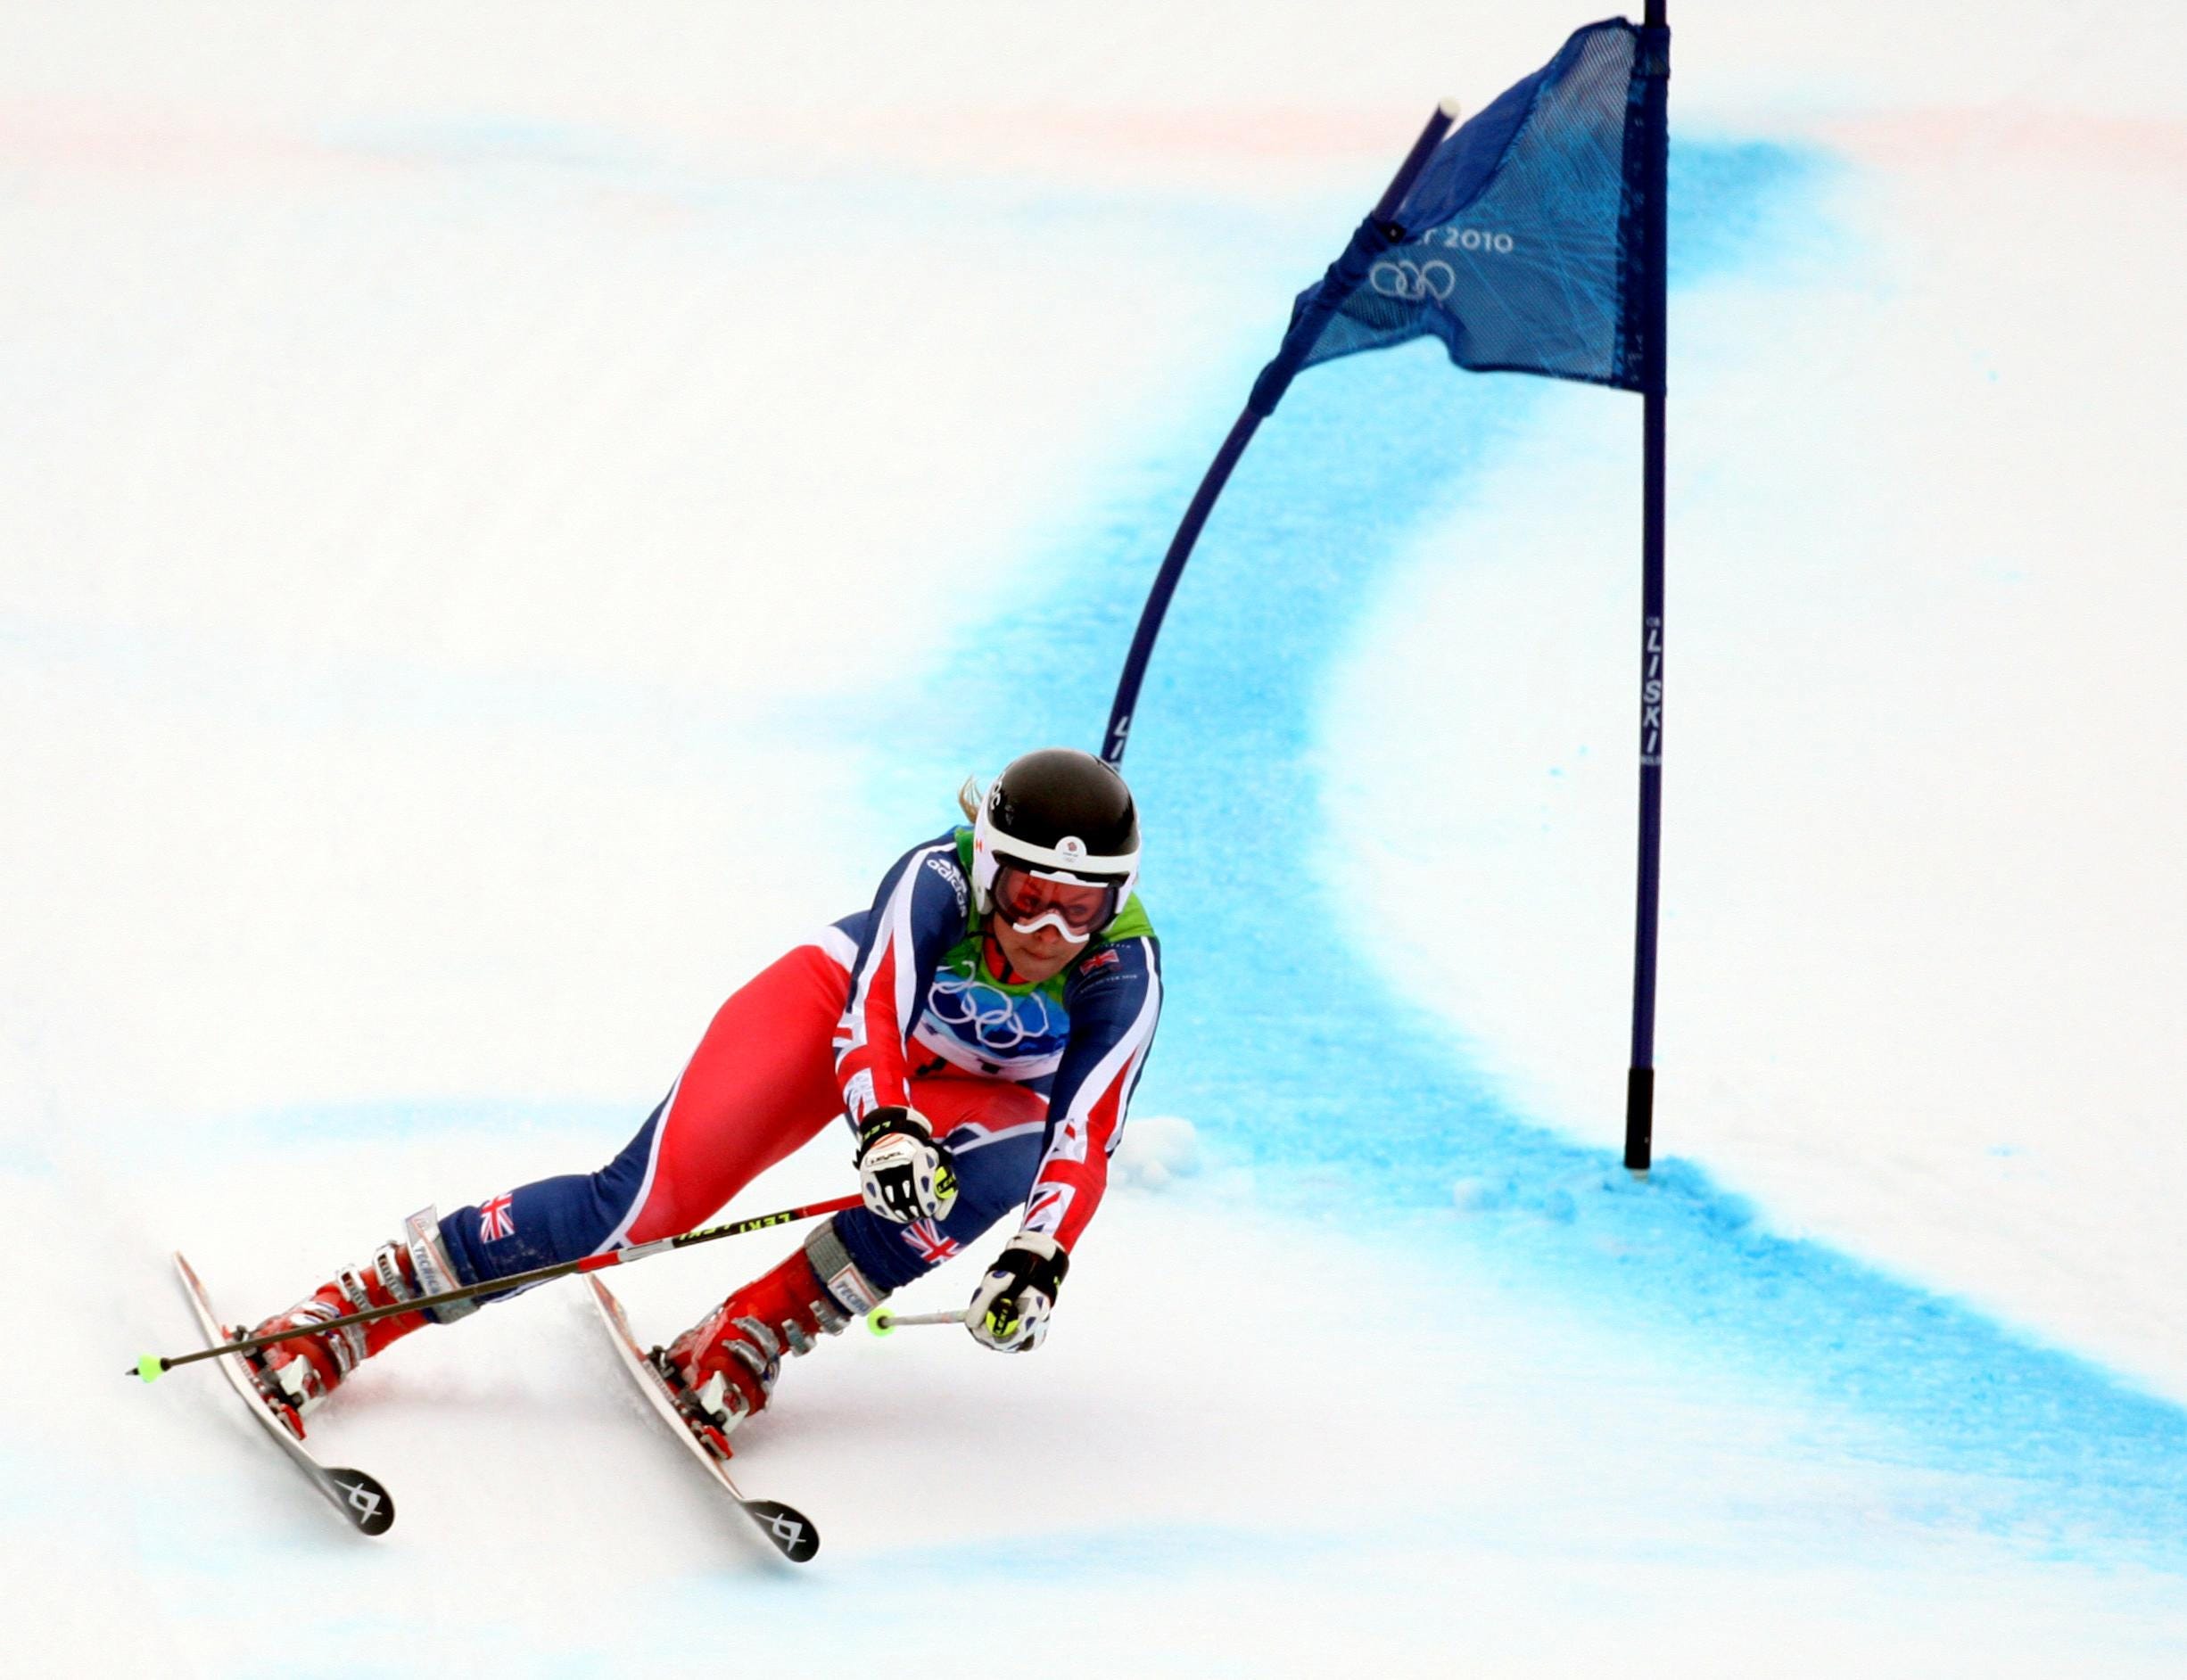 Chemmy Alcott, Britain's four-time Winter Olympian, announces her retirement